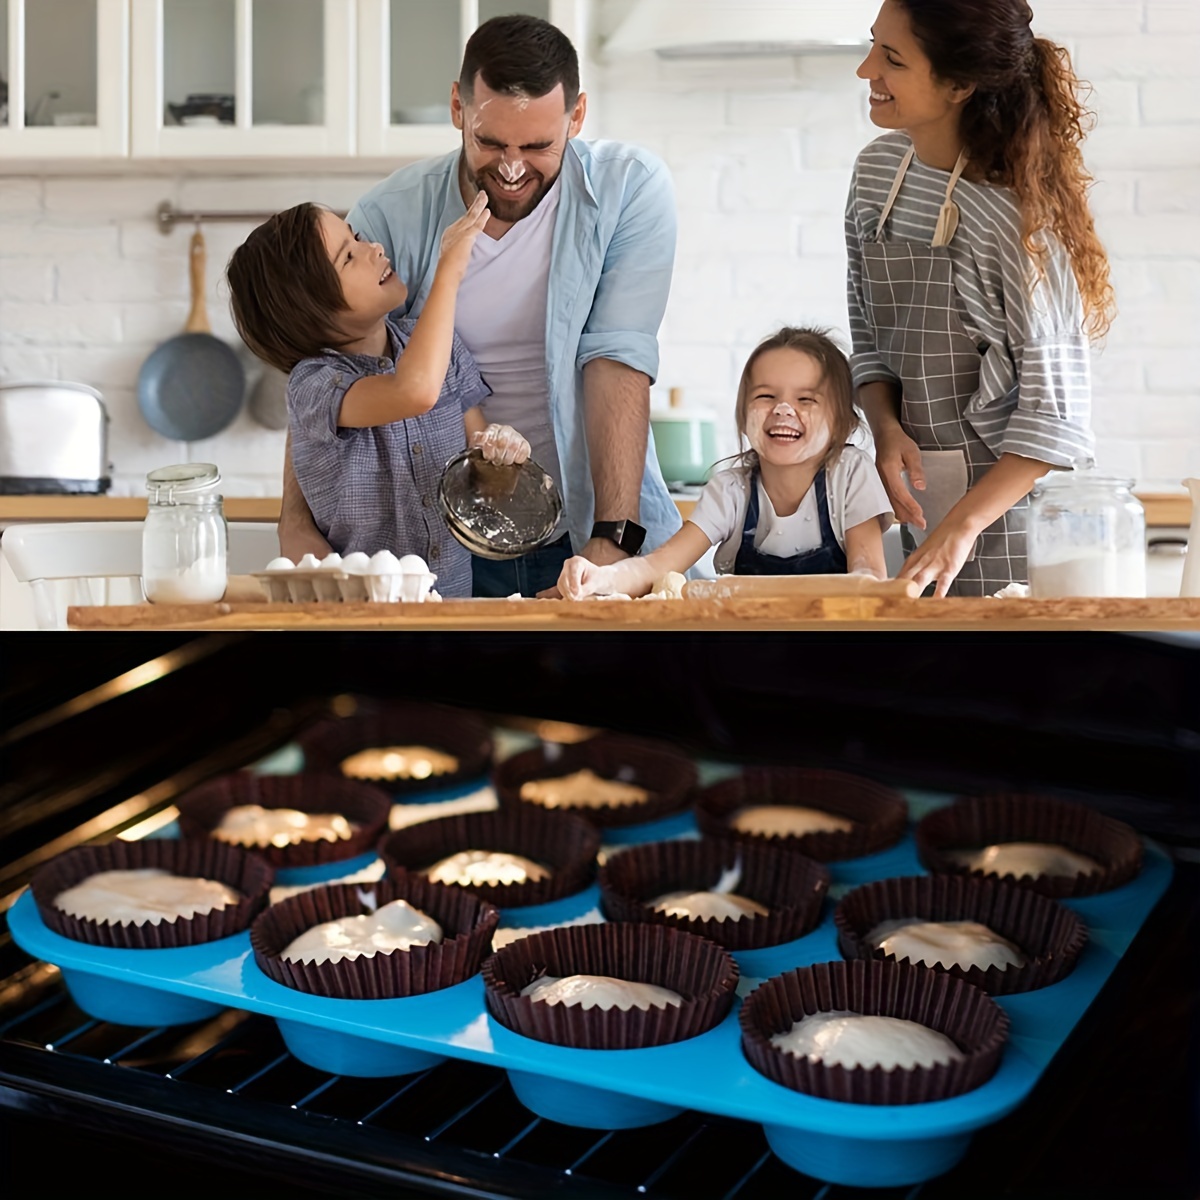 Silicone Muffin Pan Set – Non-Stick Bakeware Muffin Pan 12-Cup & Mini  Muffin Pan 24-Cup,Silicone Baking Molds for Muffins, Cupcakes, Cupcake Pan  with 1 Silicone Spatula & 1 Oil Brush